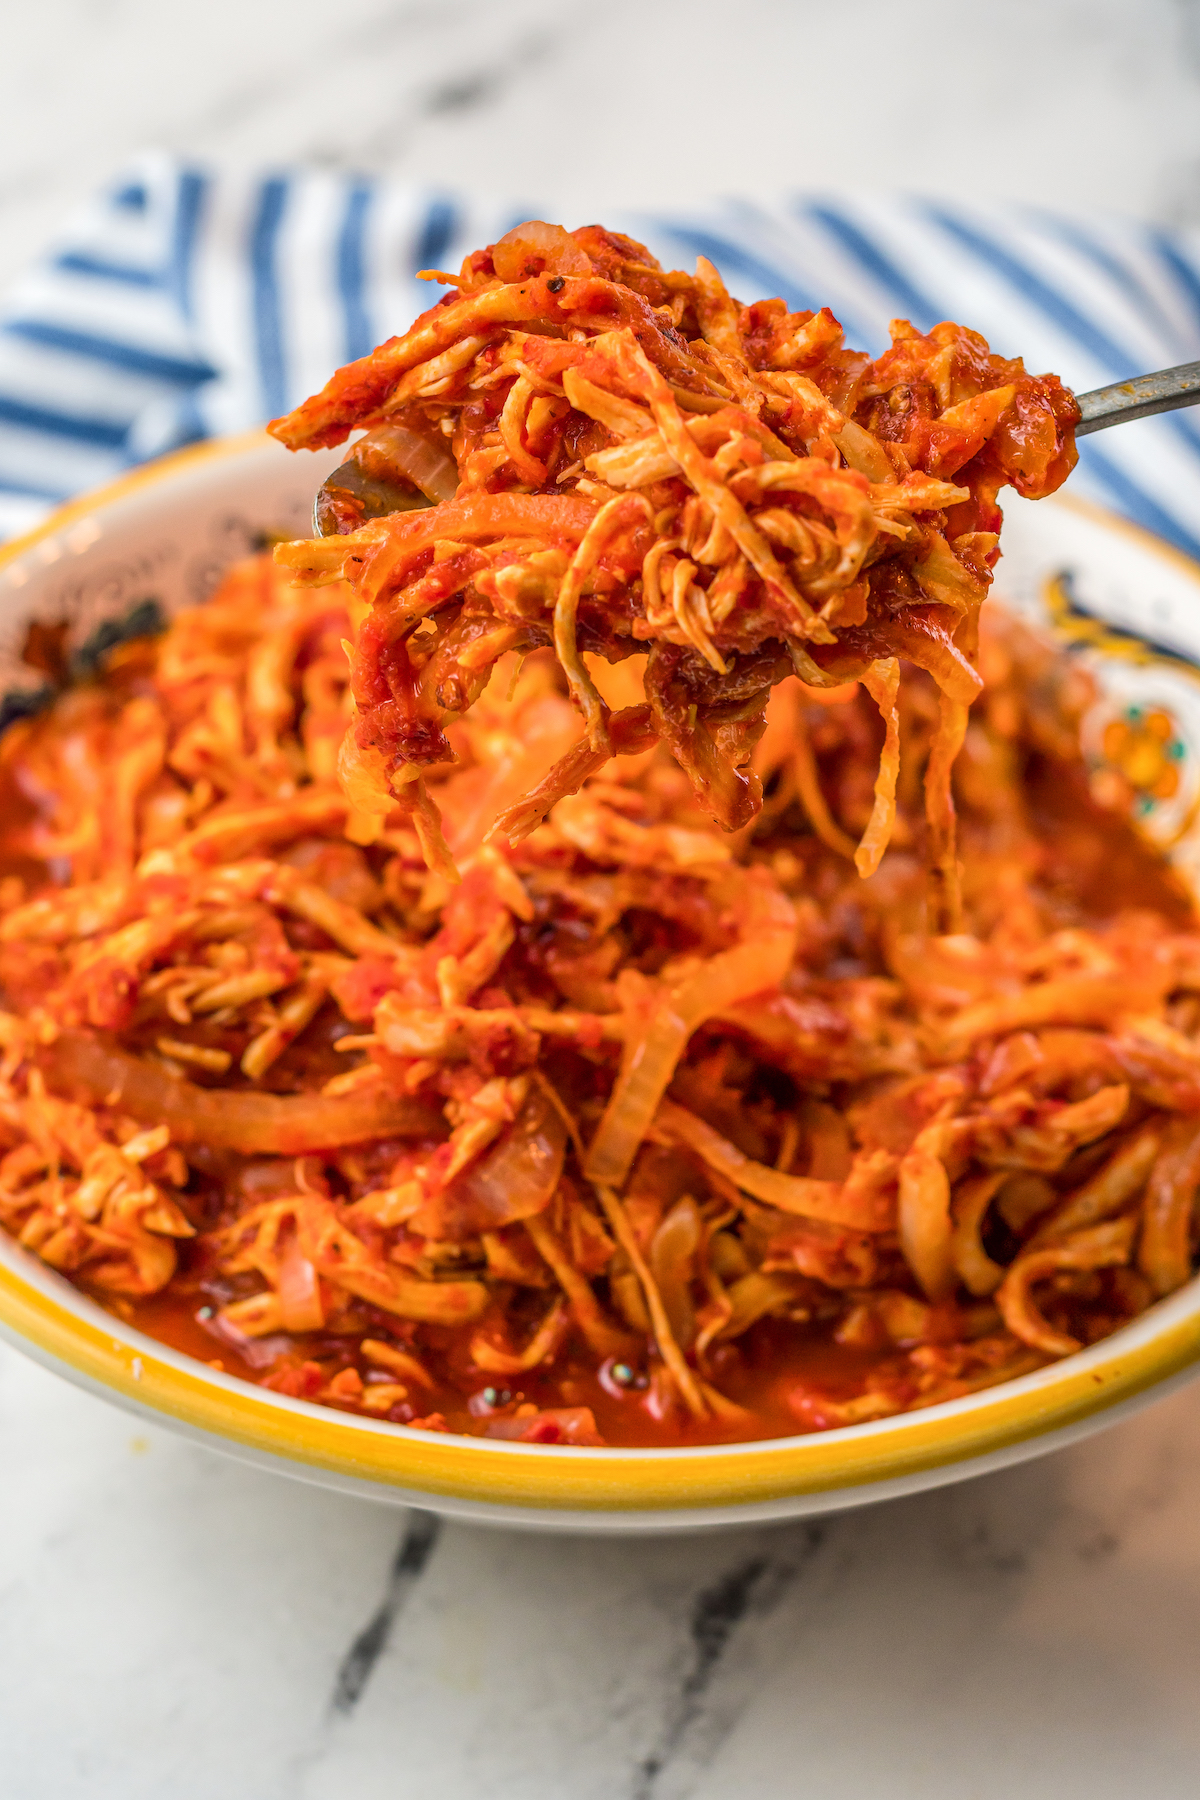 Shredded chicken in a red sauce in a bowl